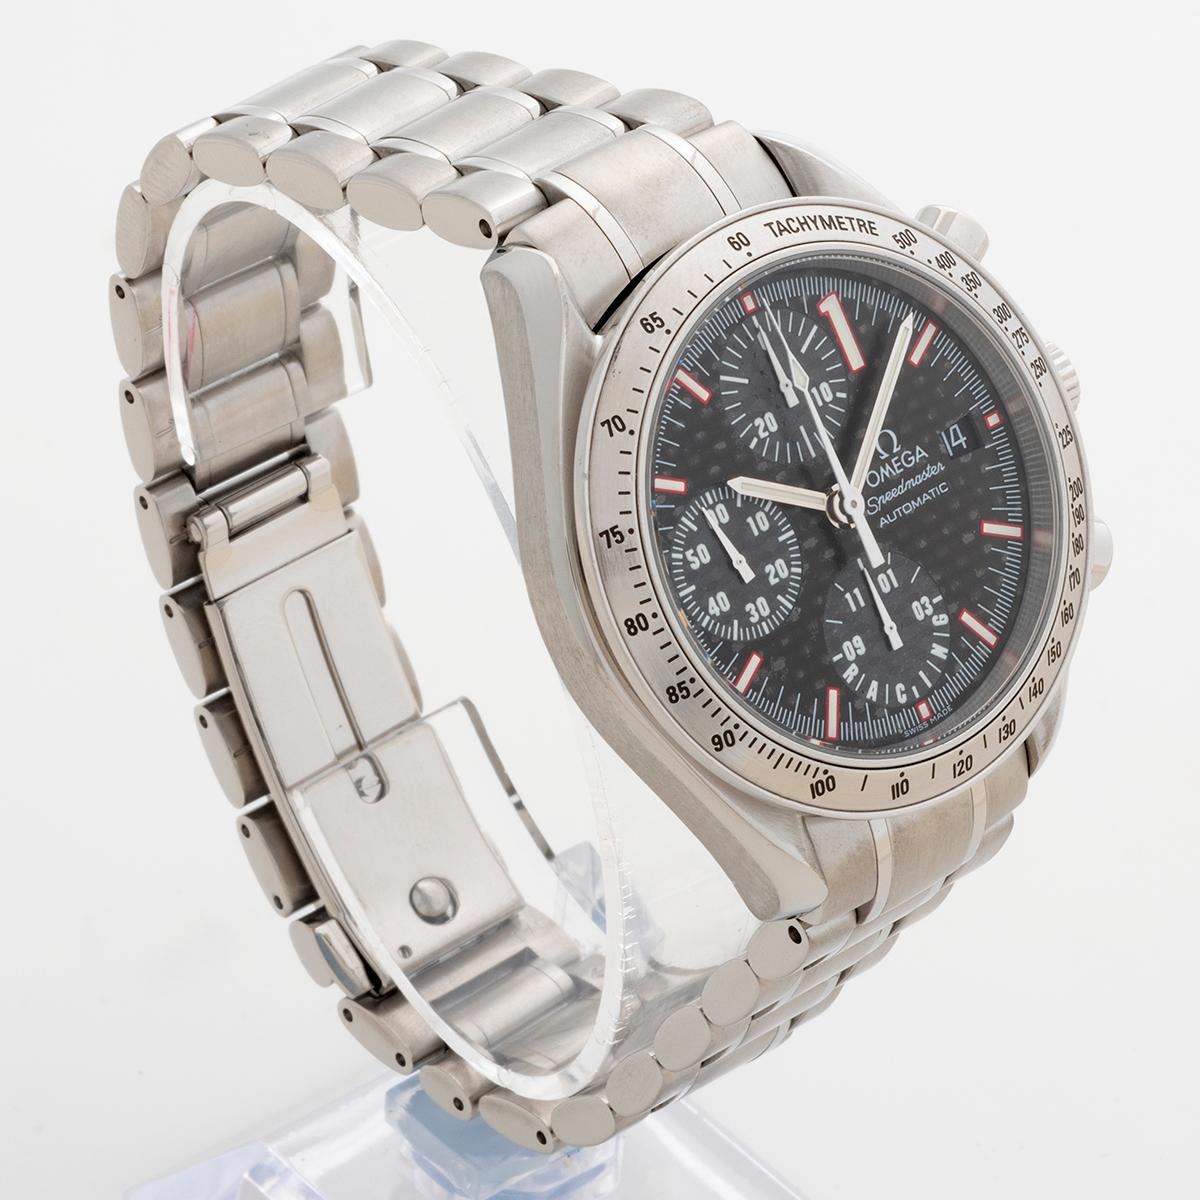 Our limited edition Omega Speedmaster Racing Chronograph, also known as a 